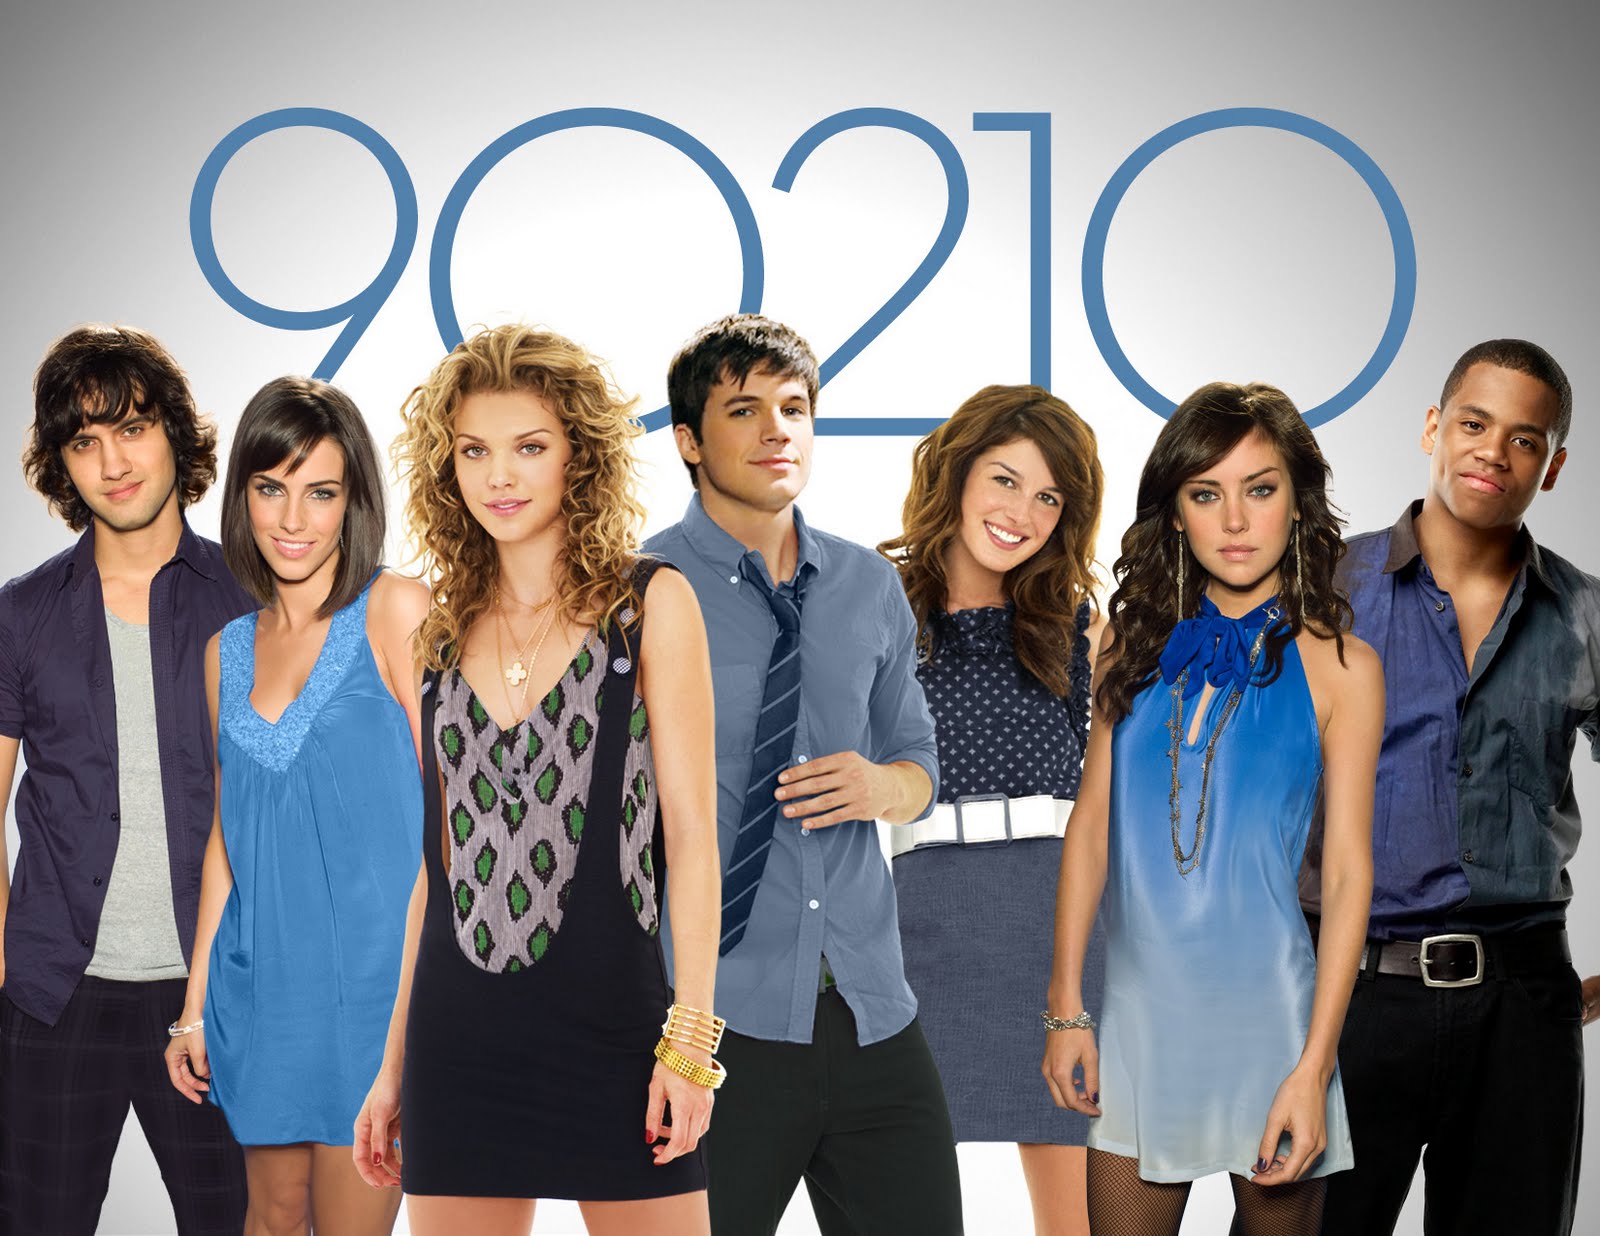 90210 Season 3 Episode 22 To the Future Watch Online